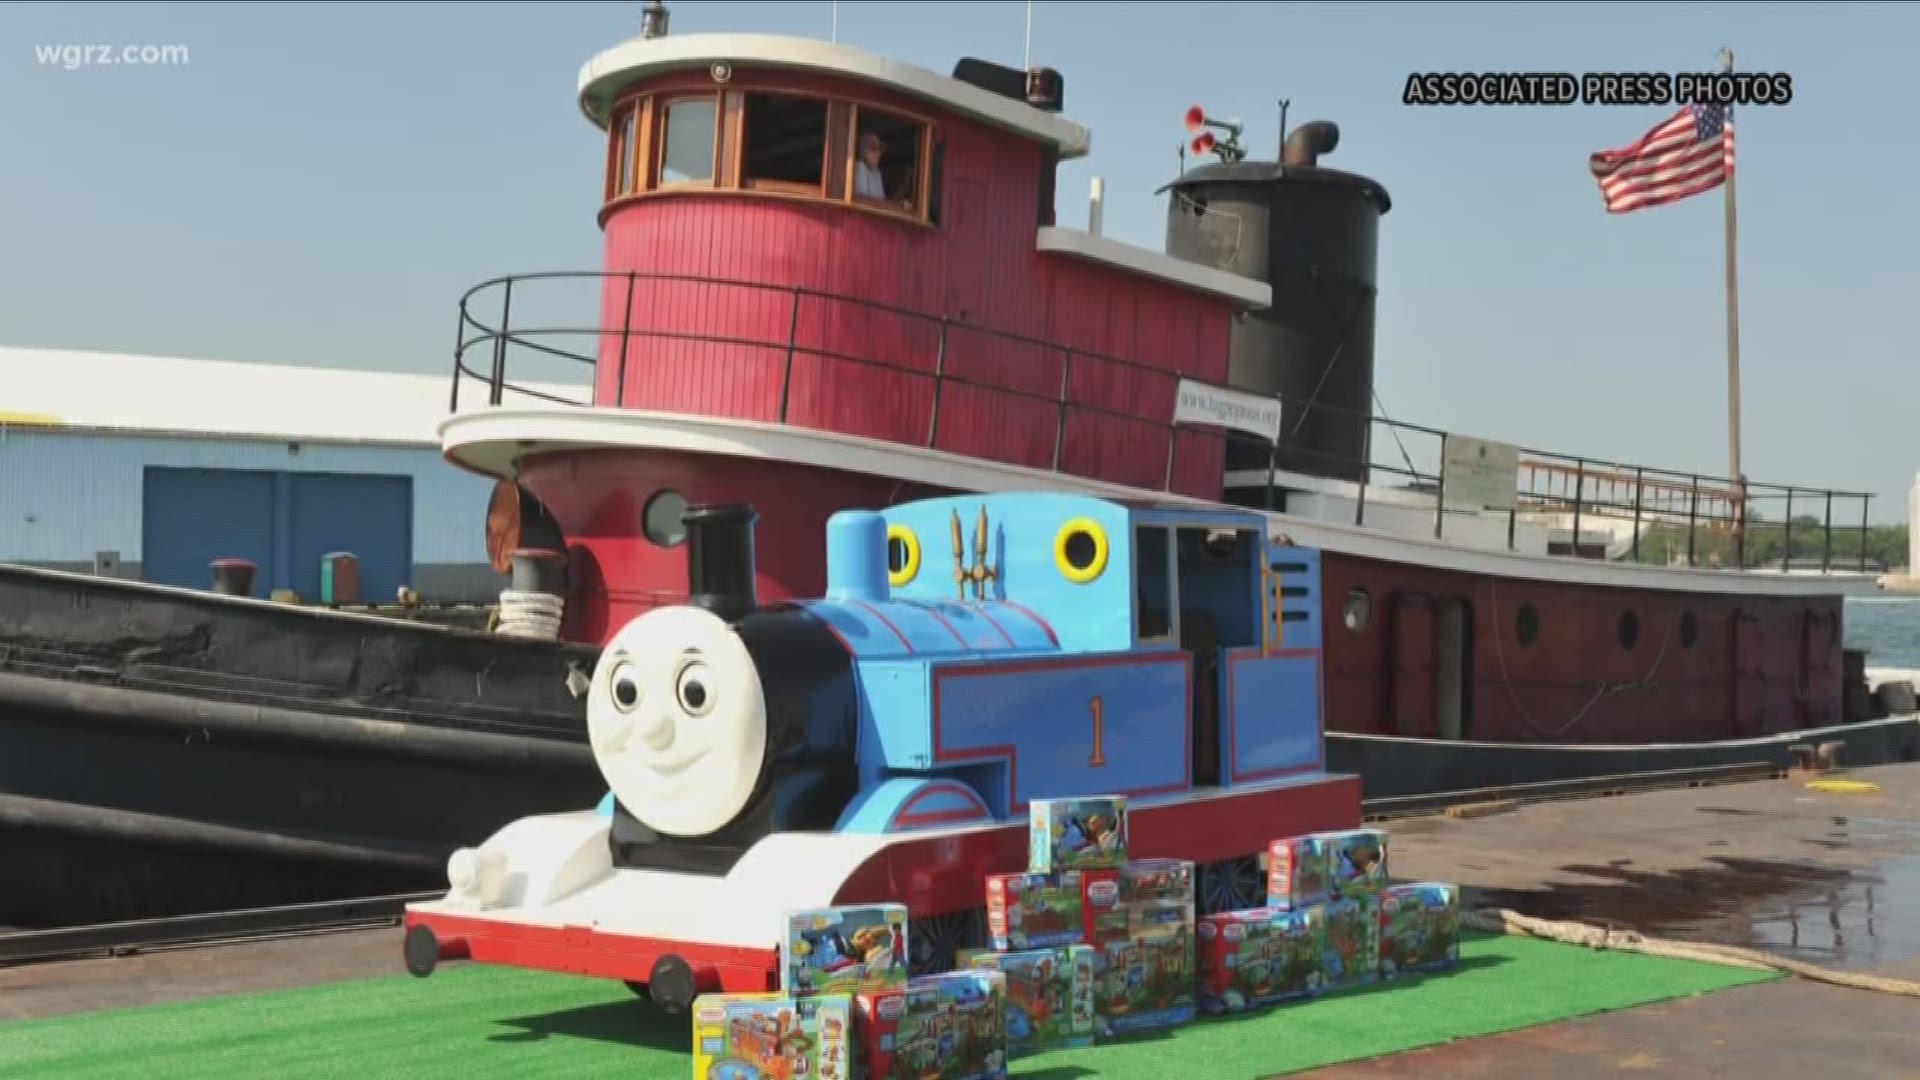 thomas the tank engine is in medina.
you can take a 25-minute ride at the railroad museum.